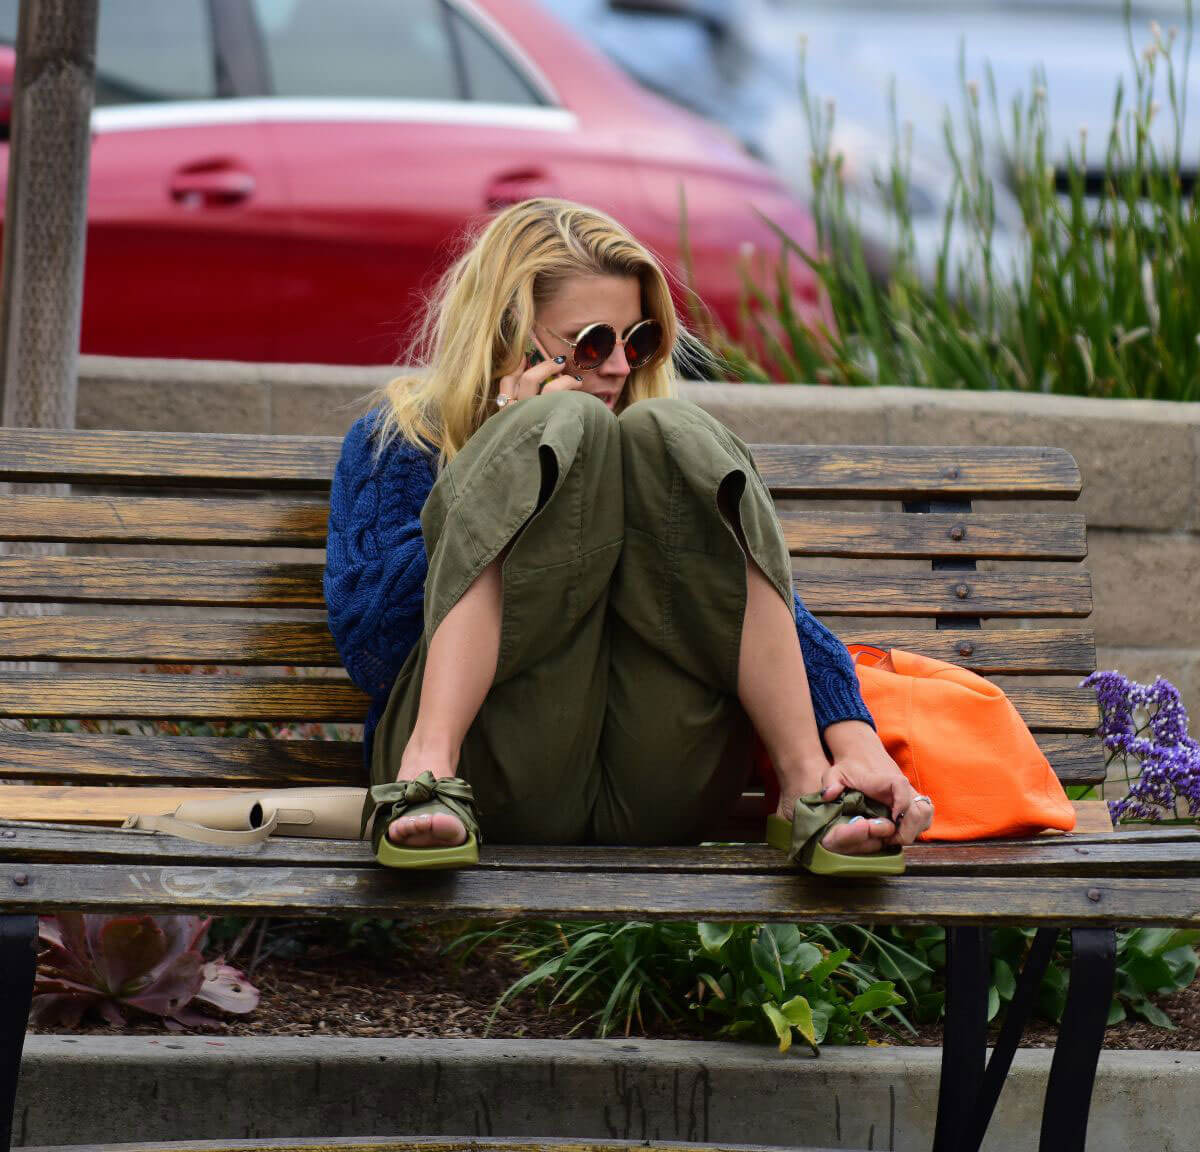 Busy Philipps Stills on the Bench in Los Angeles